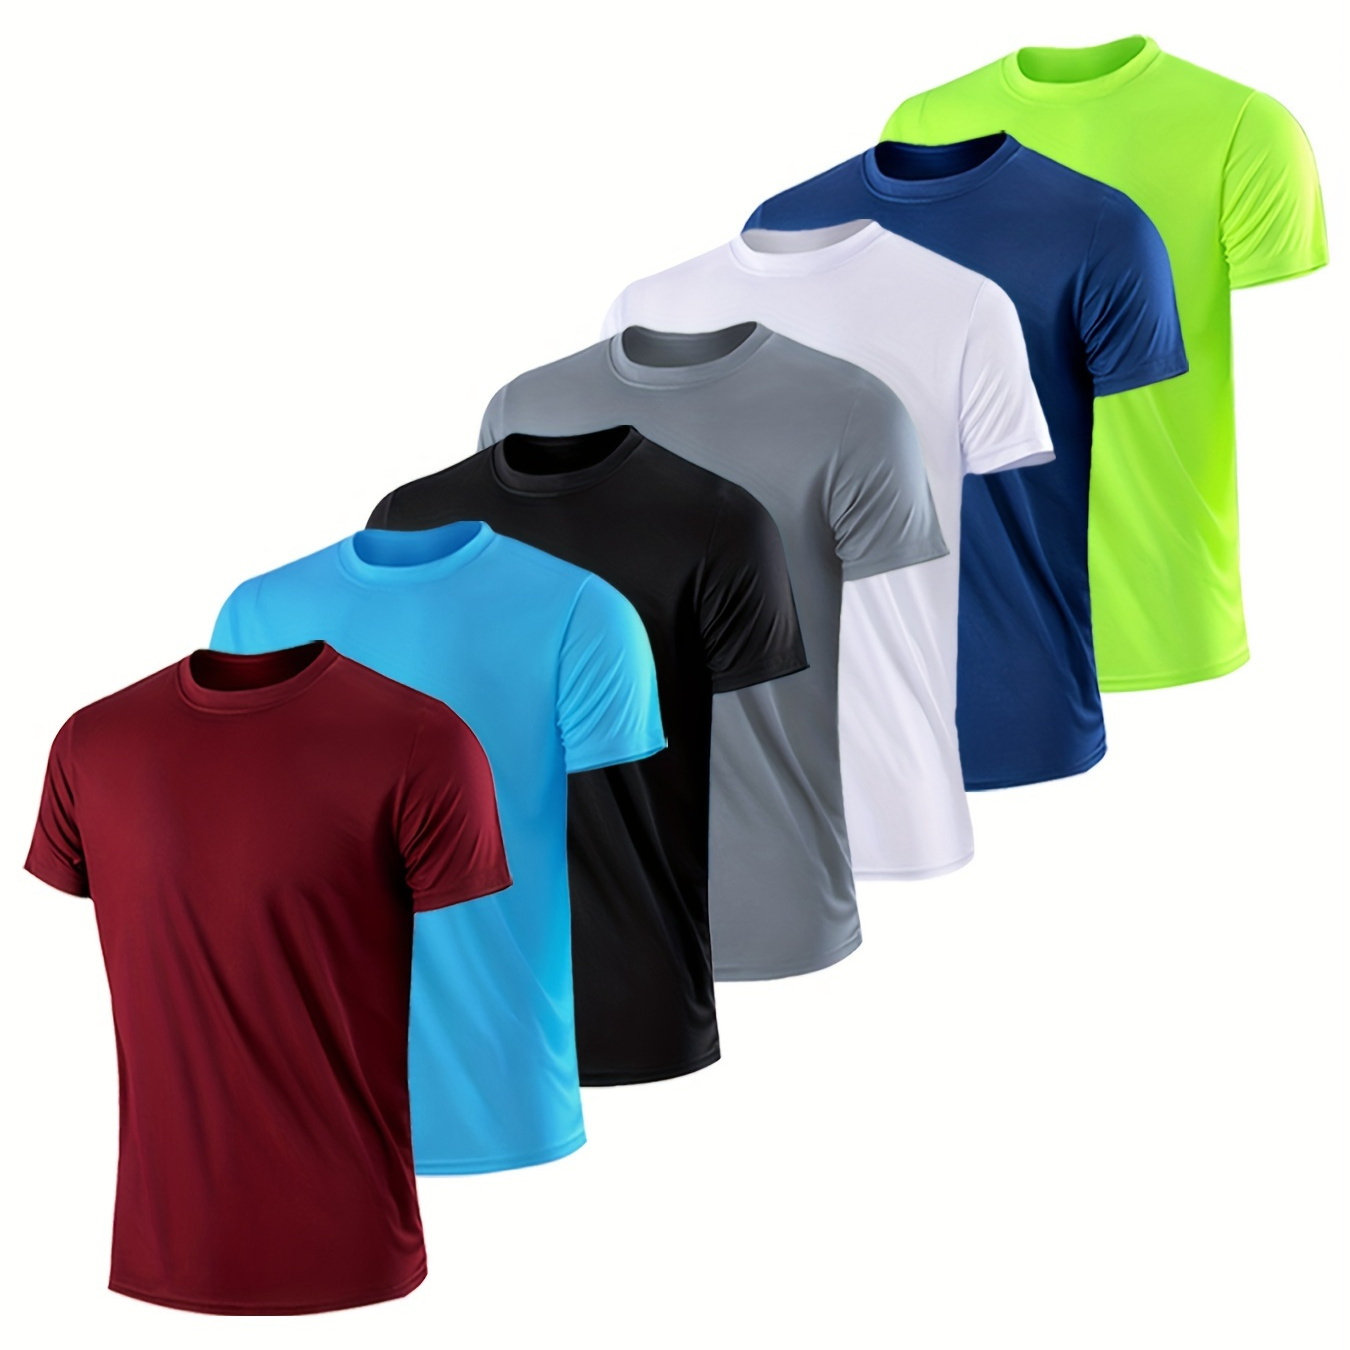 

7pcs Men's Crew Neck Fashionable Short Sleeve Sports T-shirt, Comfortable And Versatile, For Summer And Spring, Athletic Style, Comfort Fit T-shirt, As Gifts